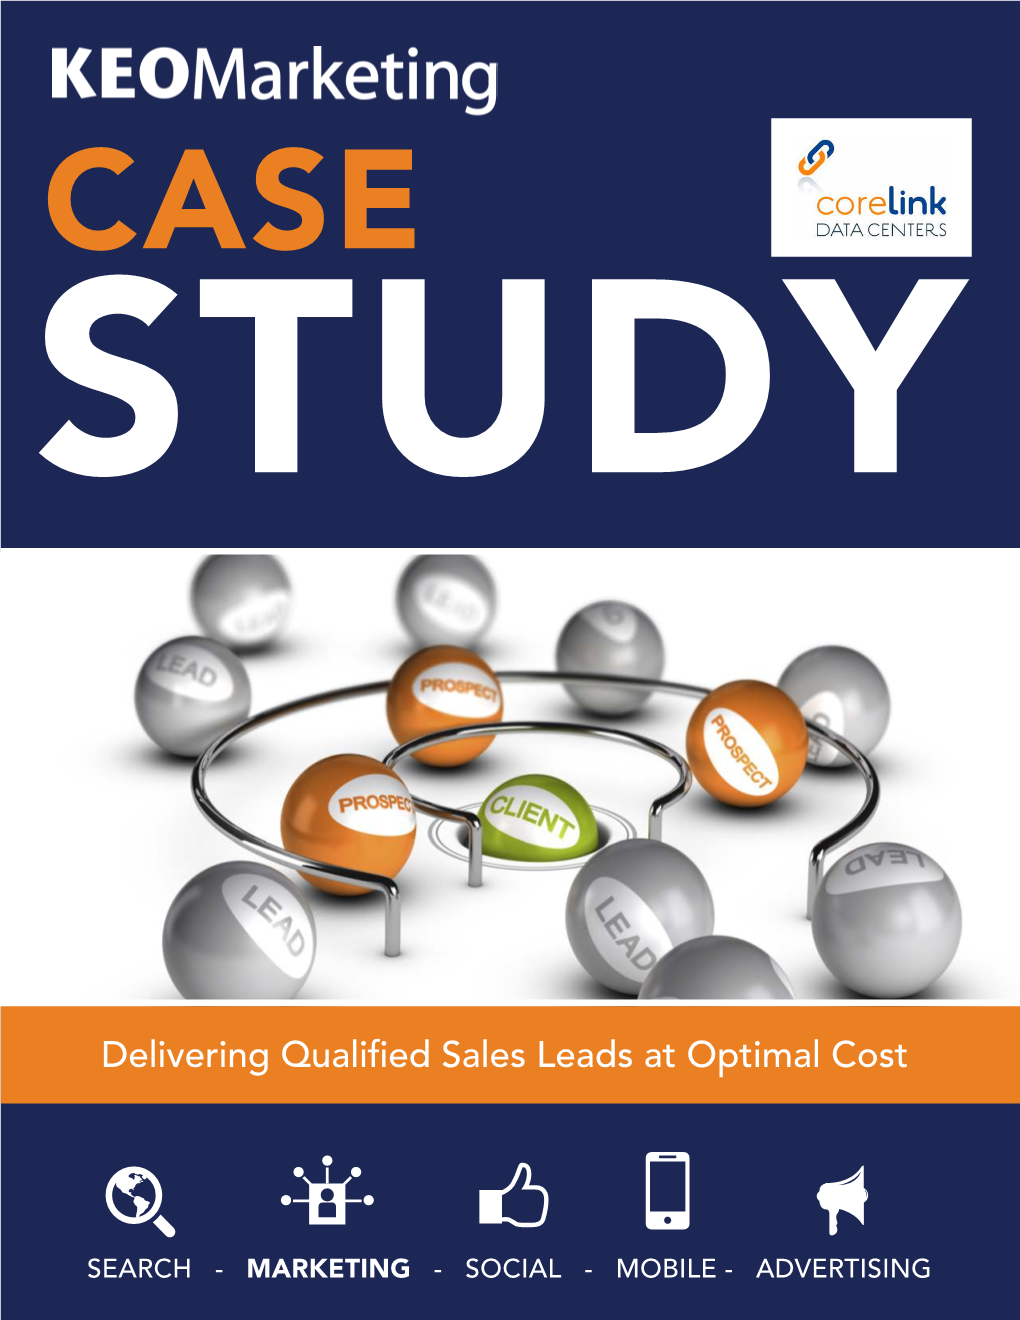 Delivering Qualified Sales Leads at Optimal Cost